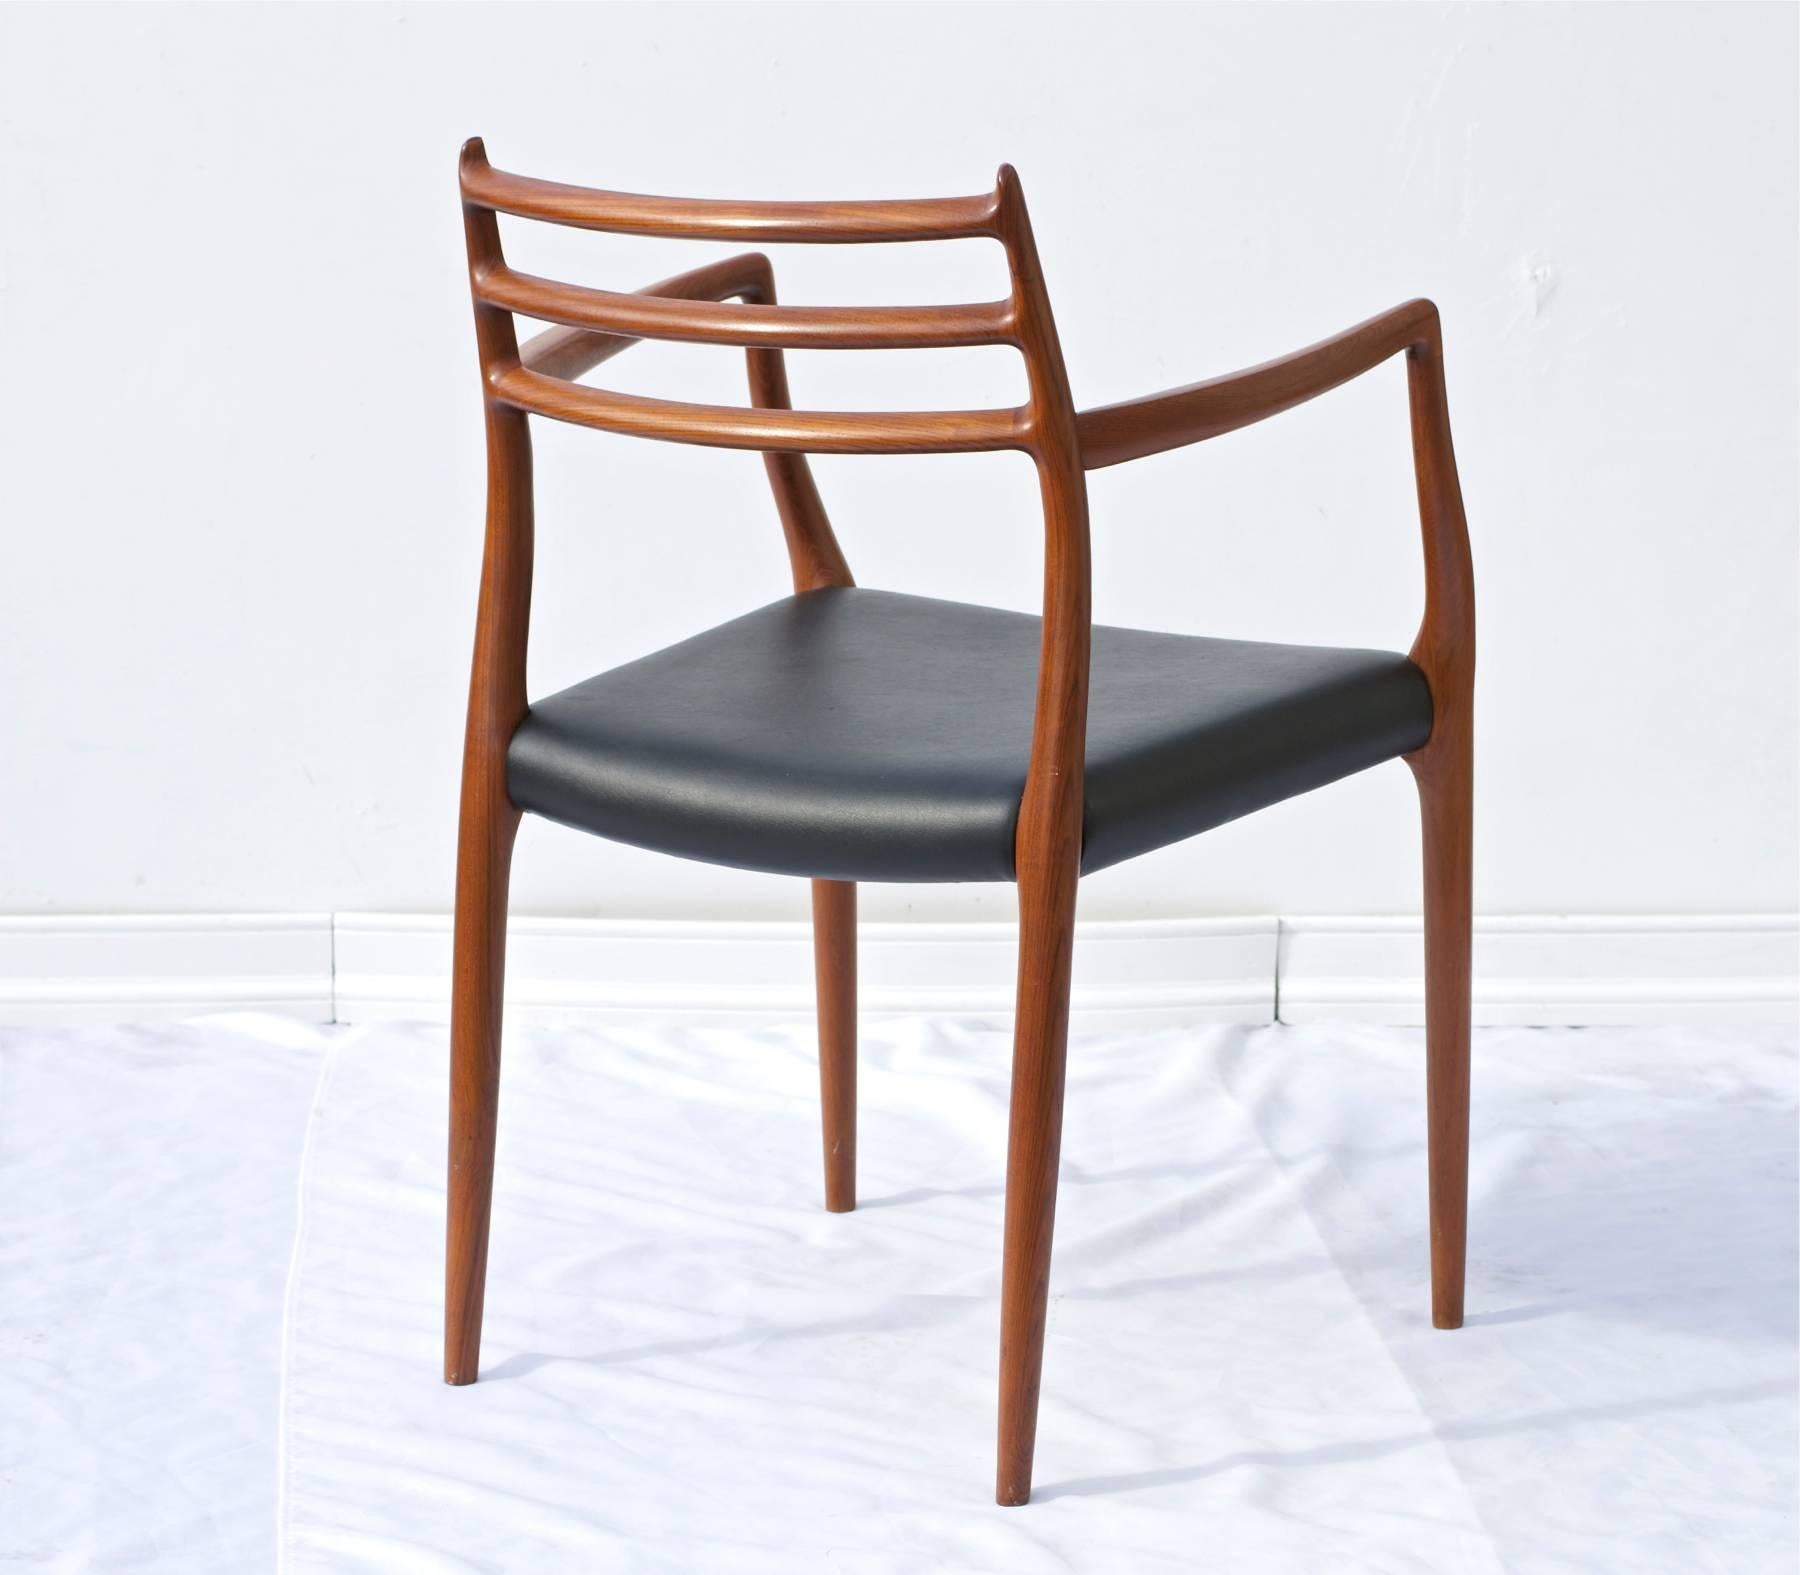 Hand-Crafted N.O. Moller Model 62 Danish Modern Dining Chairs of Teak, Pair